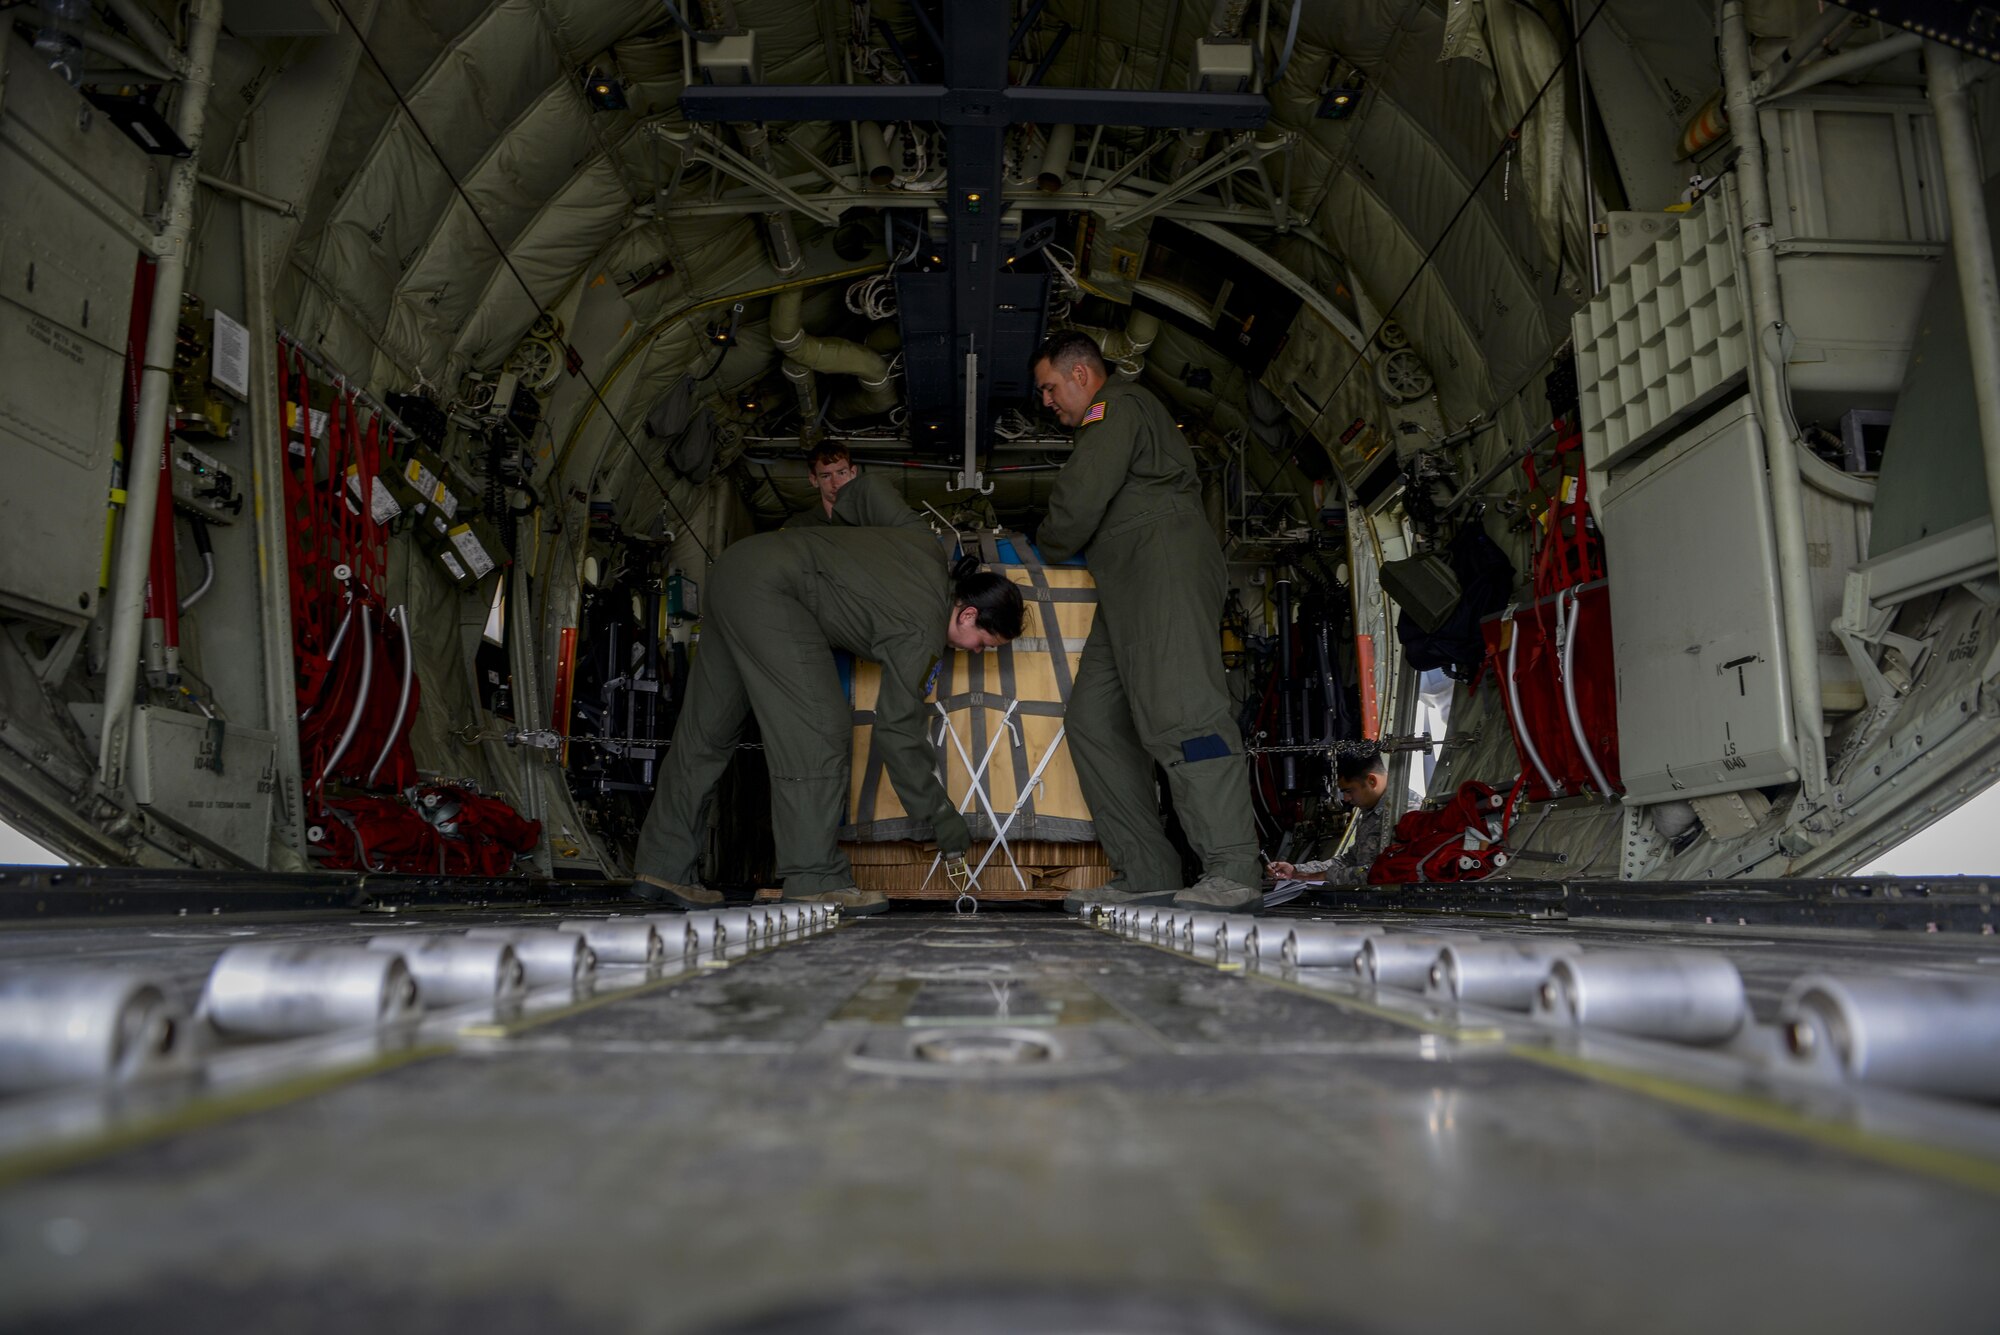 Senior Airman Emily Mitchell, 37th Airlift Squadron loadmaster prepares a C-130J Super Hercules before flight during Exercise Thracian Summer 2016 July 17, Plovdiv, Bulgaria. During the two-week forward training deployment, the 37th Airlift Squadron are conducting tactical flight training which include low-level flights, airdrop training with partnered forces and other related training events. The evolutions help preserve joint readiness, build interoperability and strengthen relationships with our NATO allies. (U.S. Air Force photo/Senior Airman Nicole Keim) 